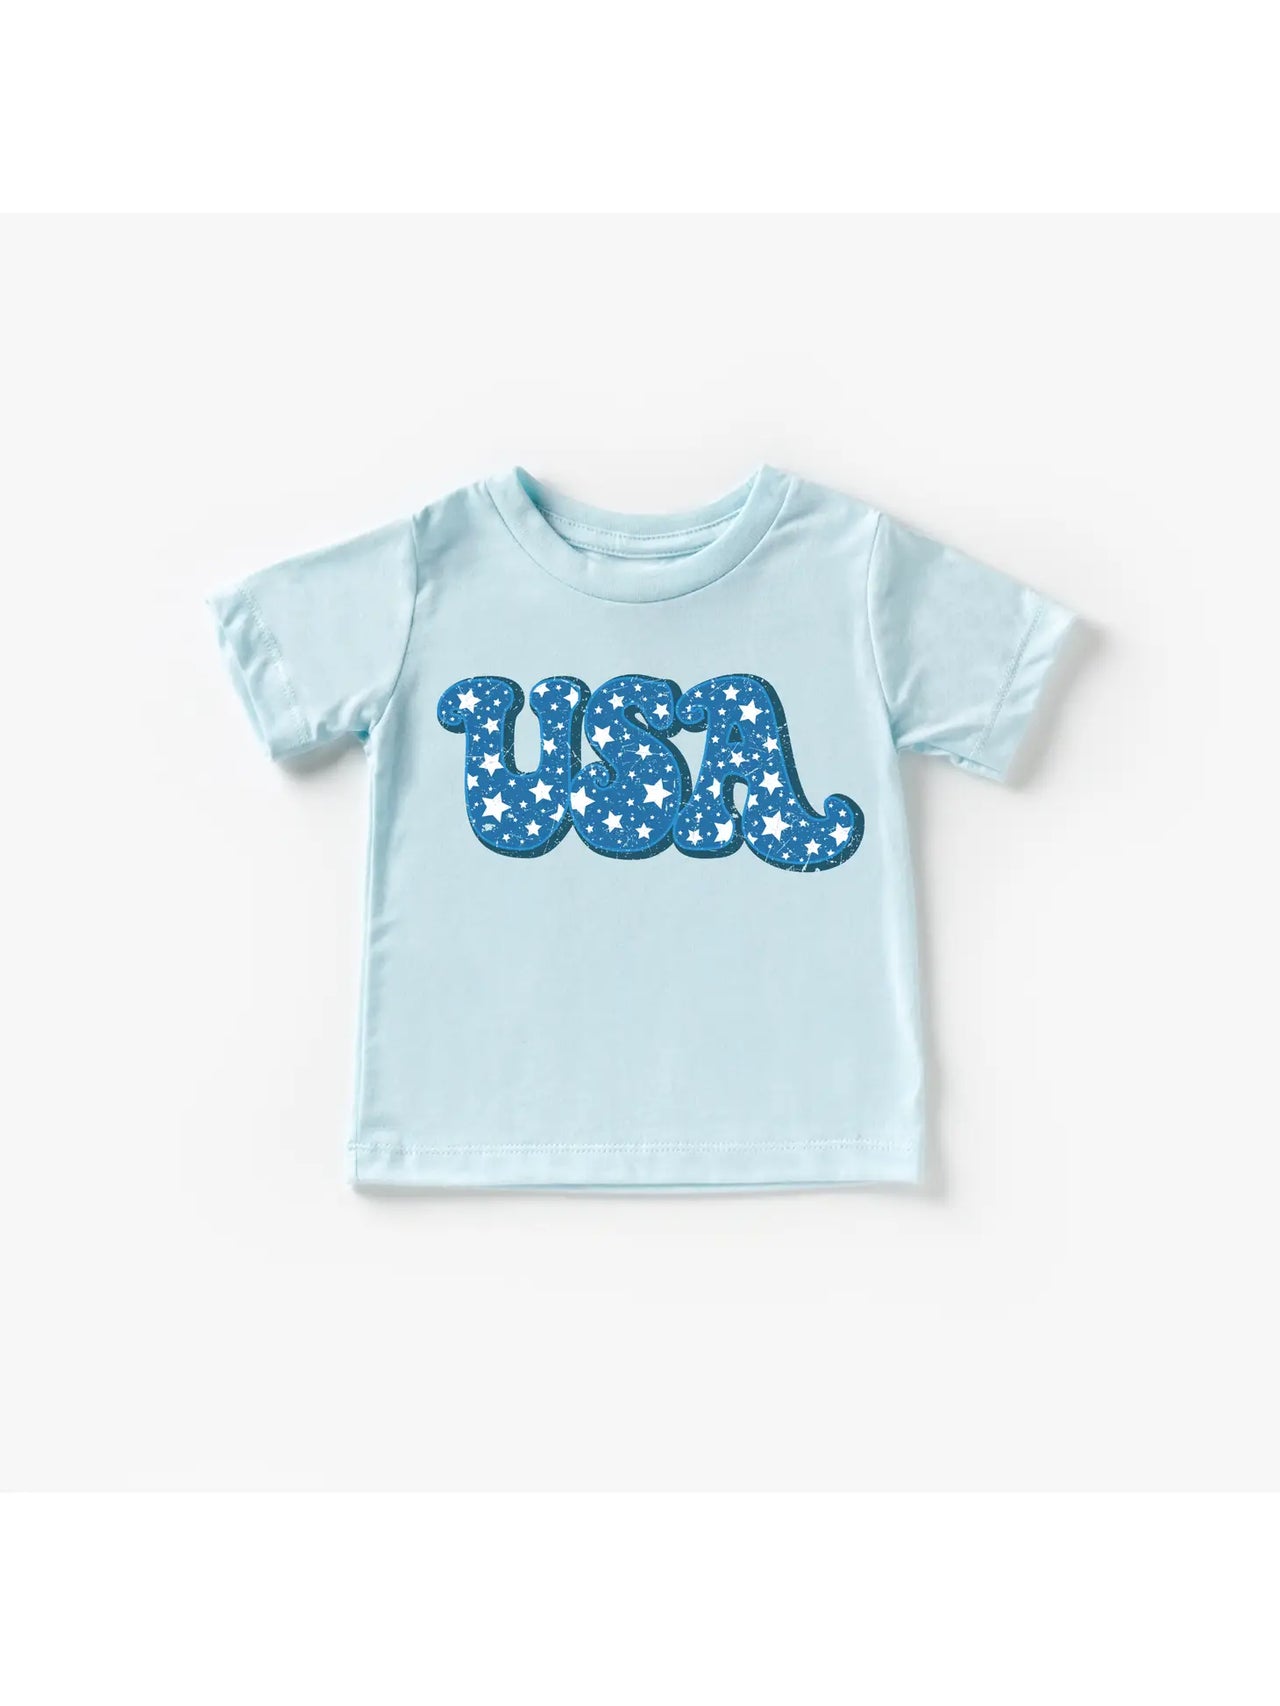 Toddler and Youth T-Shirt || USA